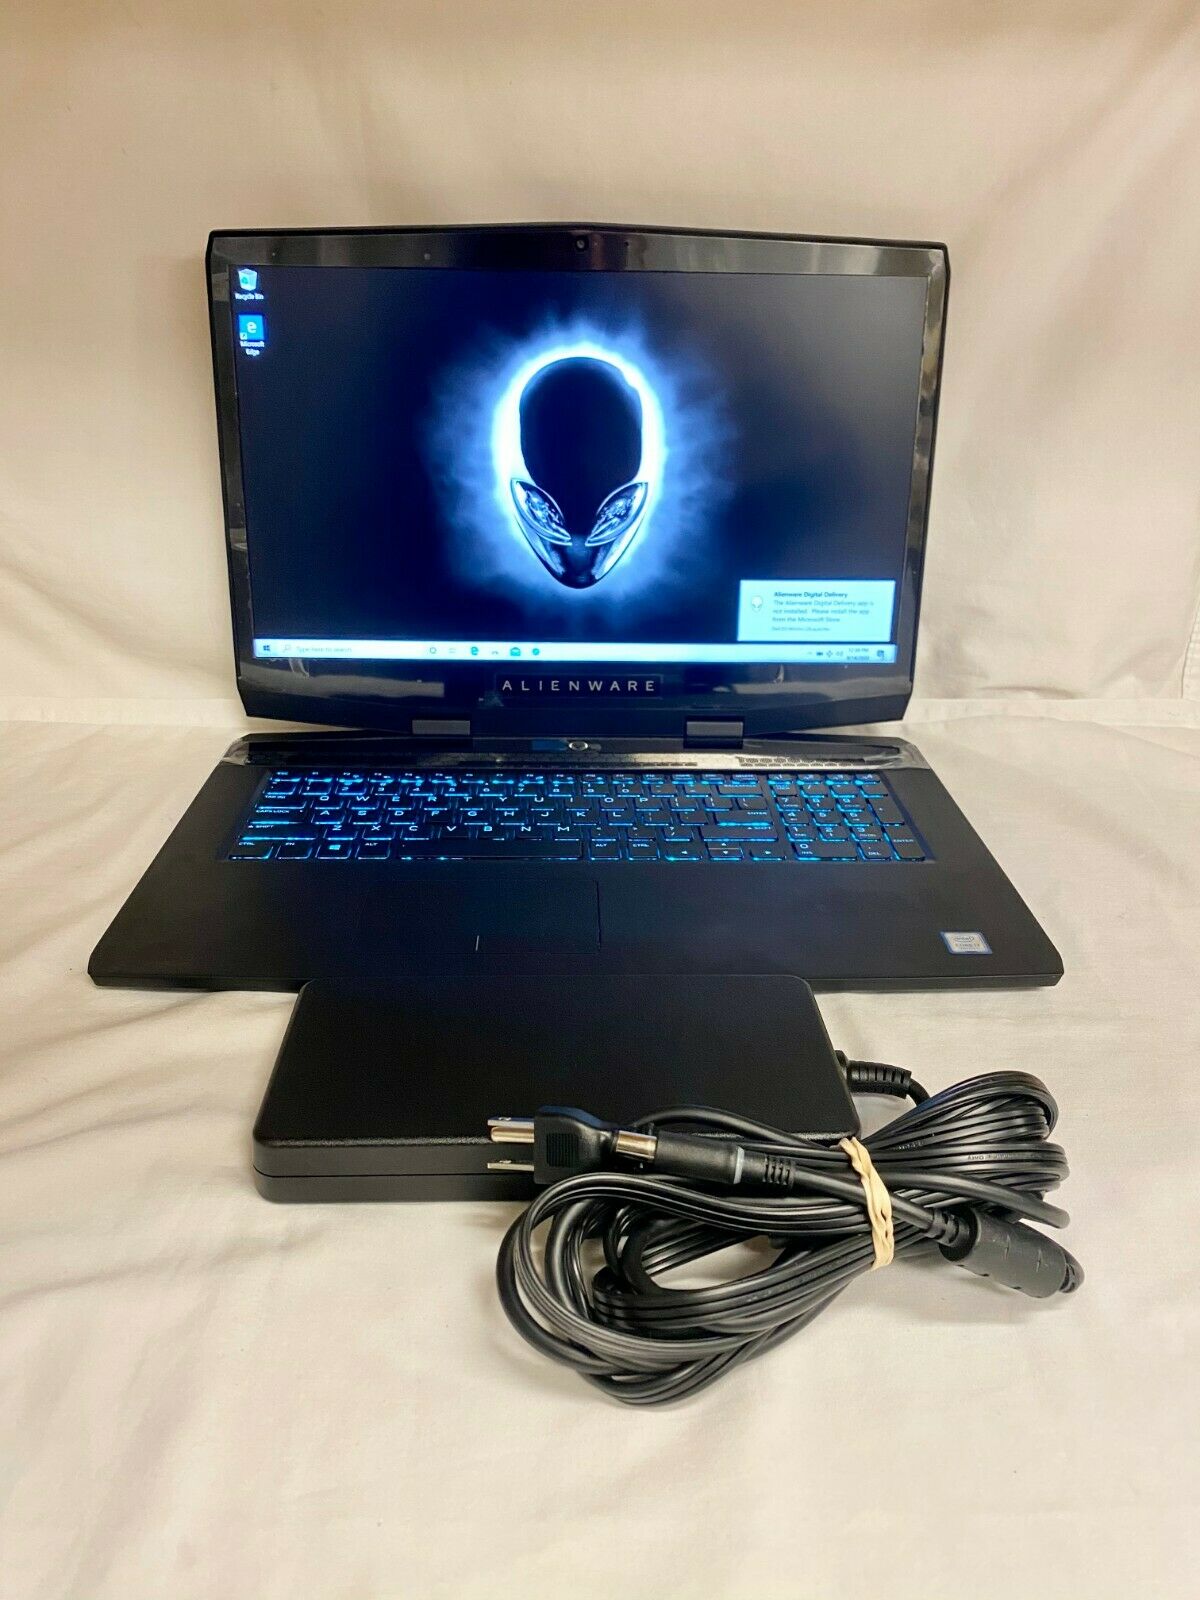 Alienware M17 R1 Gaming Laptop w/Intel i7 9th Gen, 16GB RAM, 512GB SSD, Charger